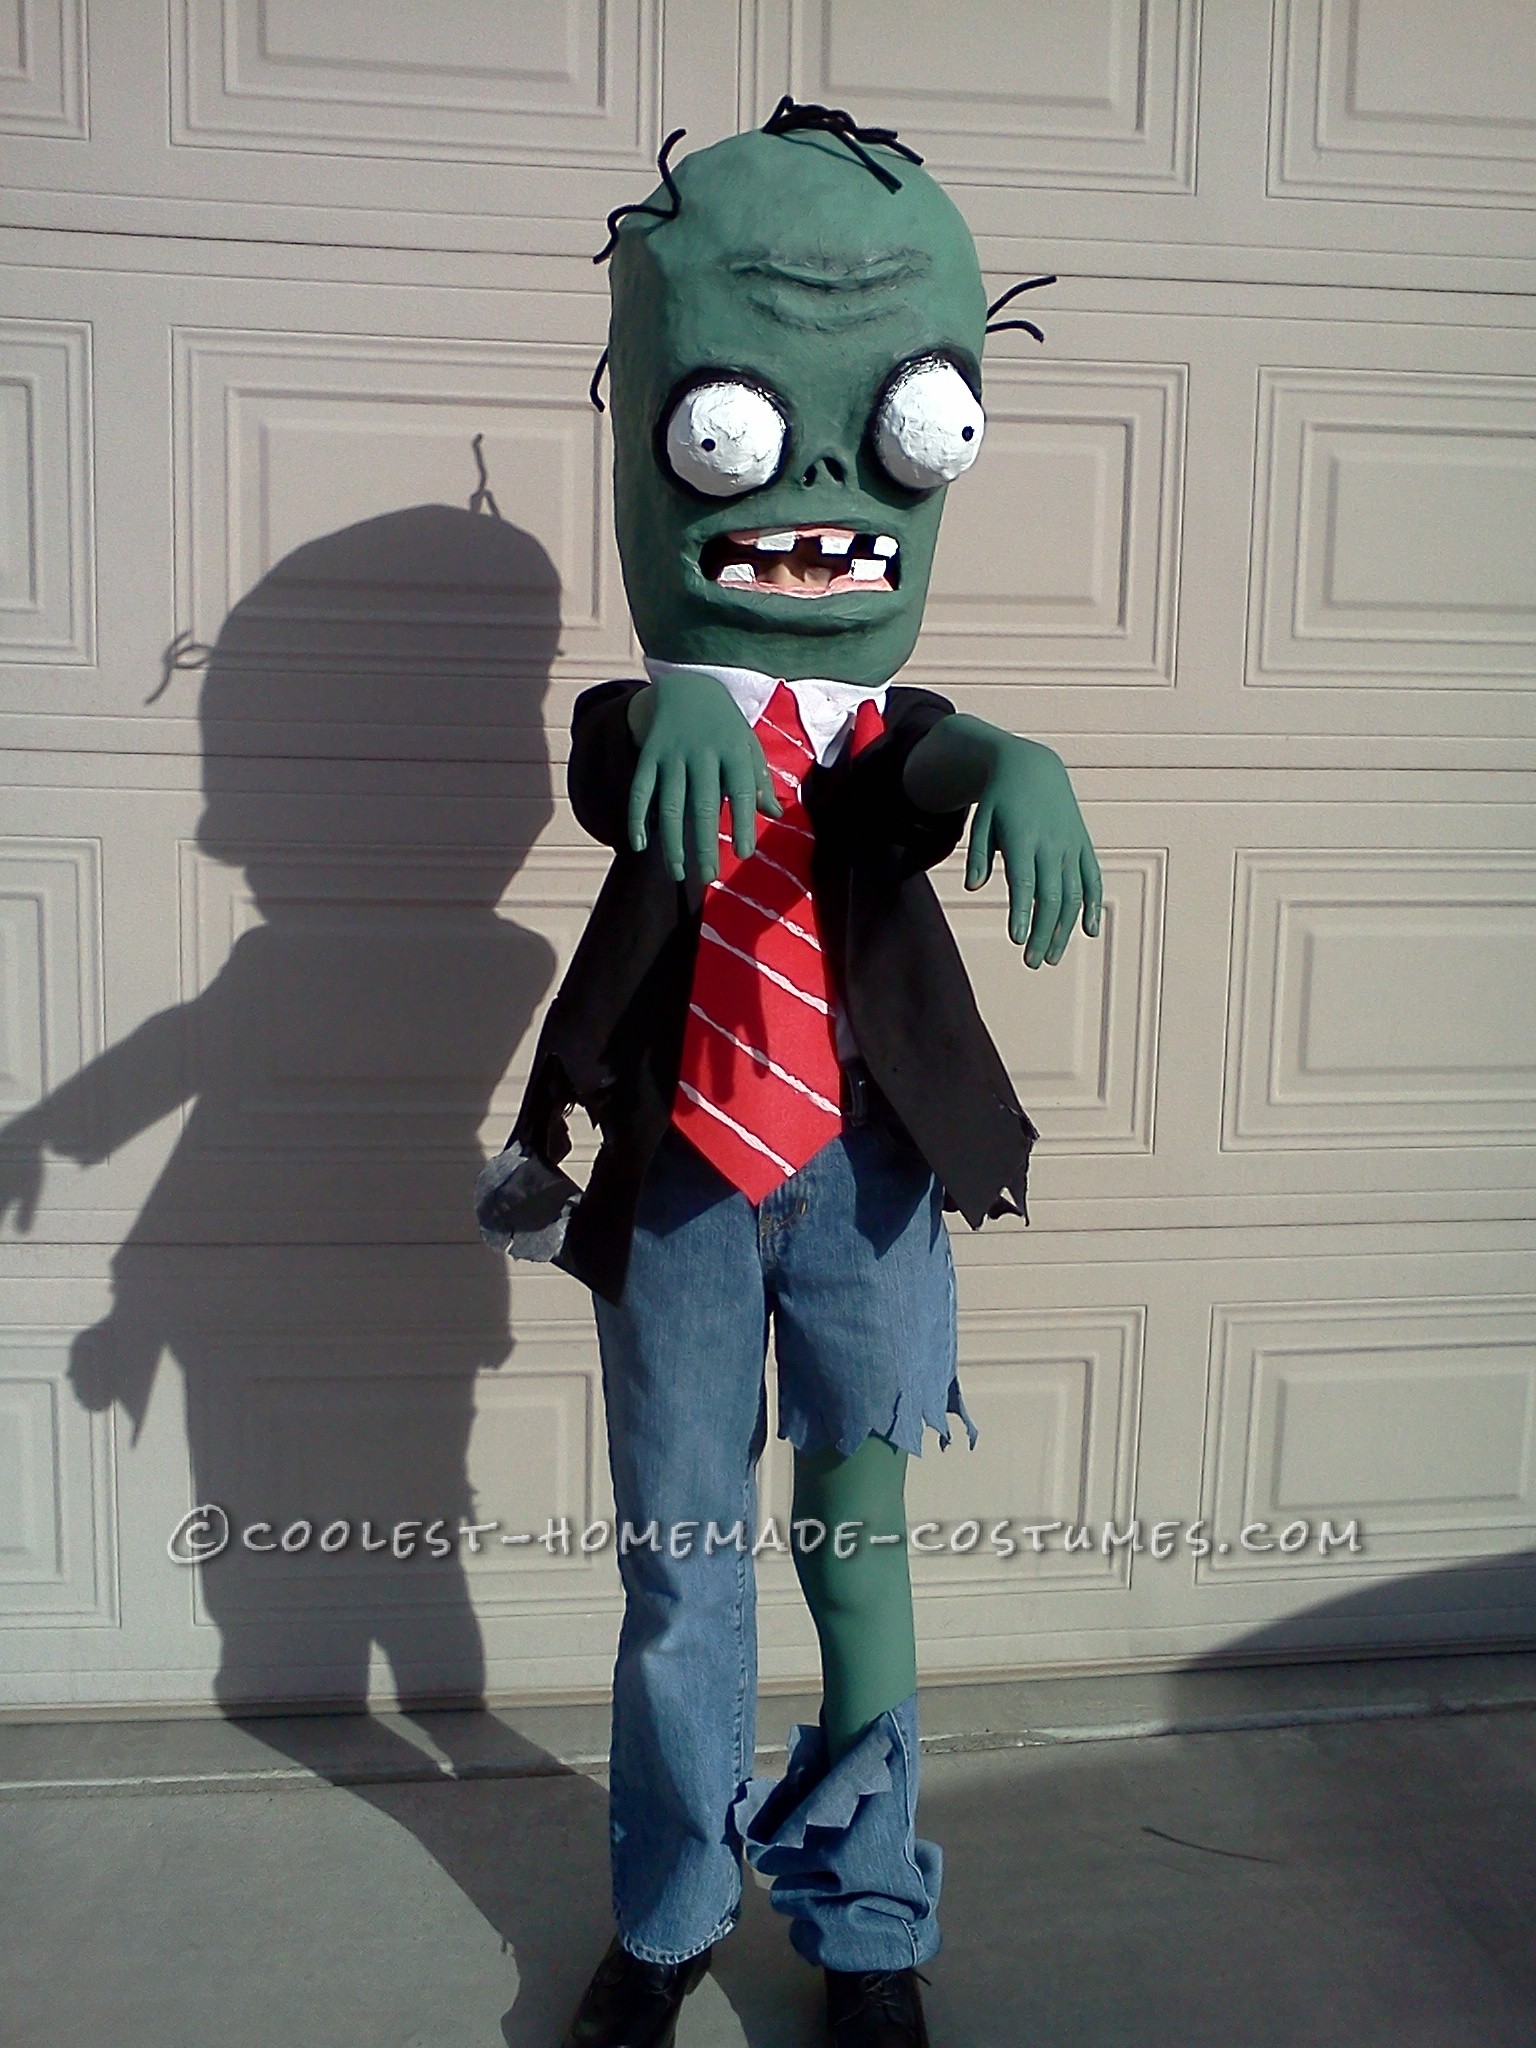 Coolest Homemade Plants Vs. Zombies Costume